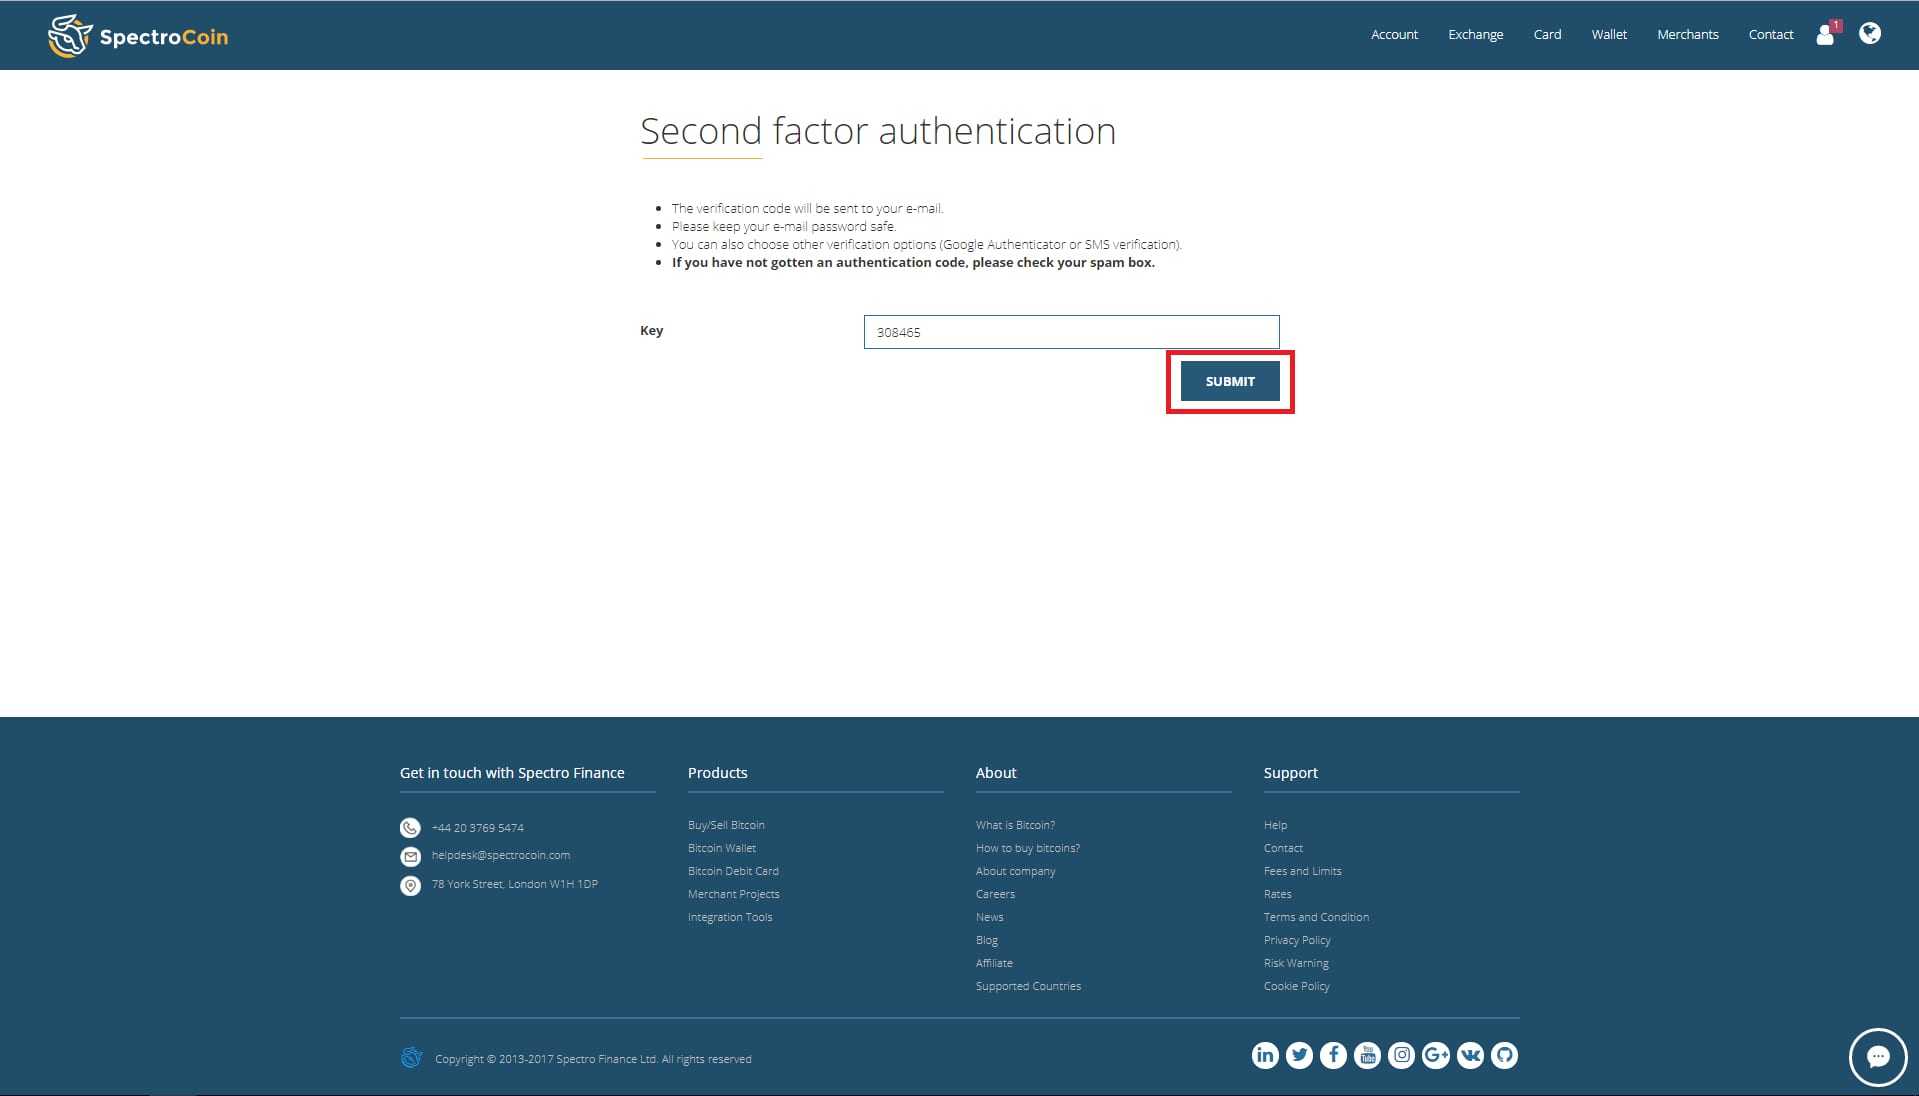 SpectroCoin  "second-factor authentication" page with a highlighted "submit" button